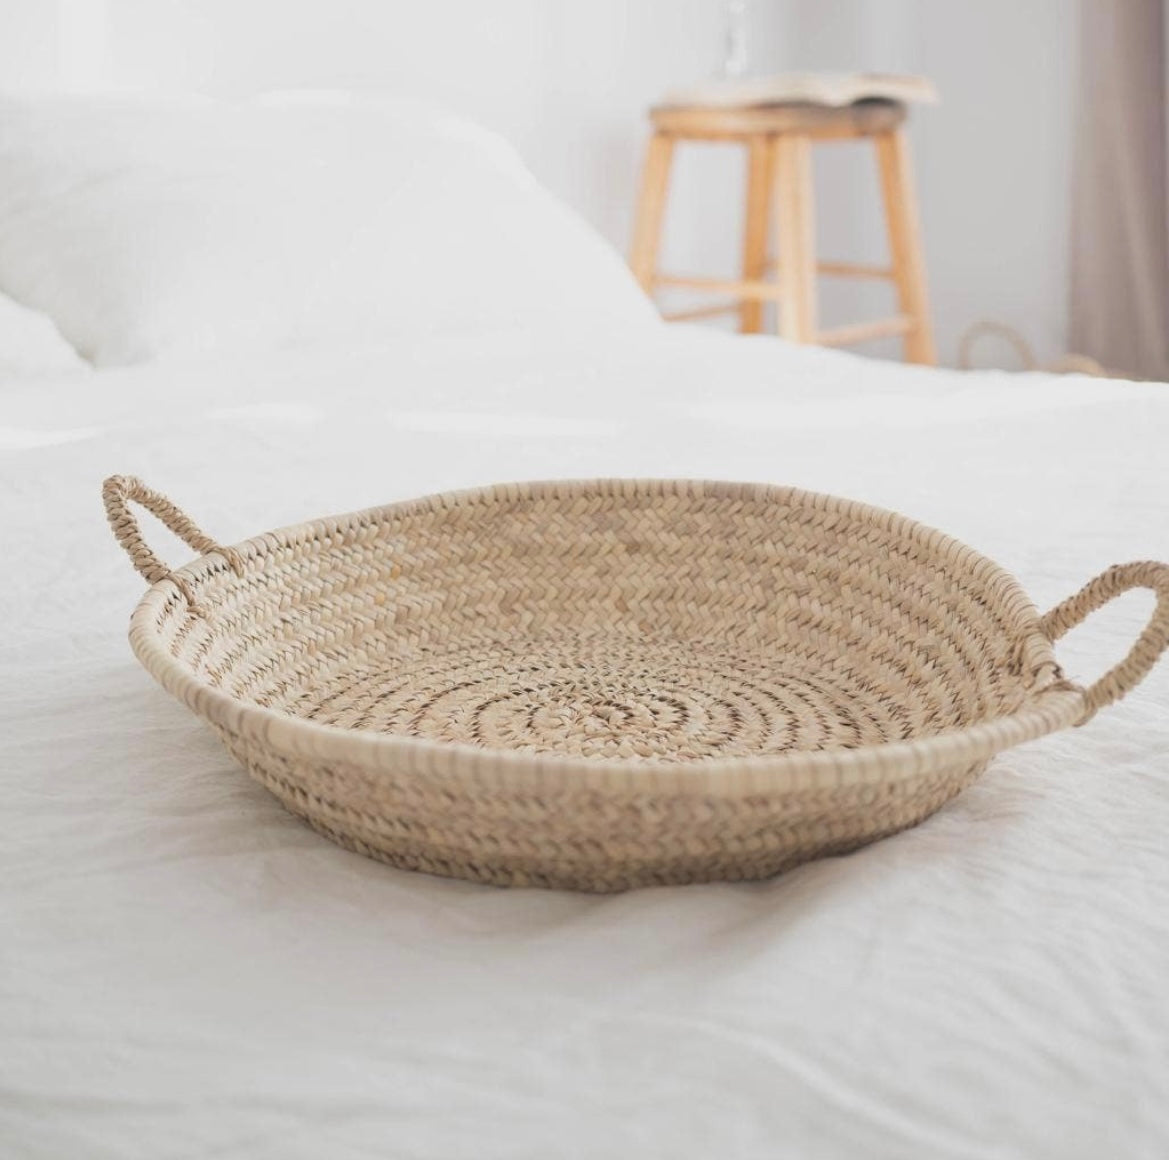 Moroccan Straw Woven Plate - 3 sizes